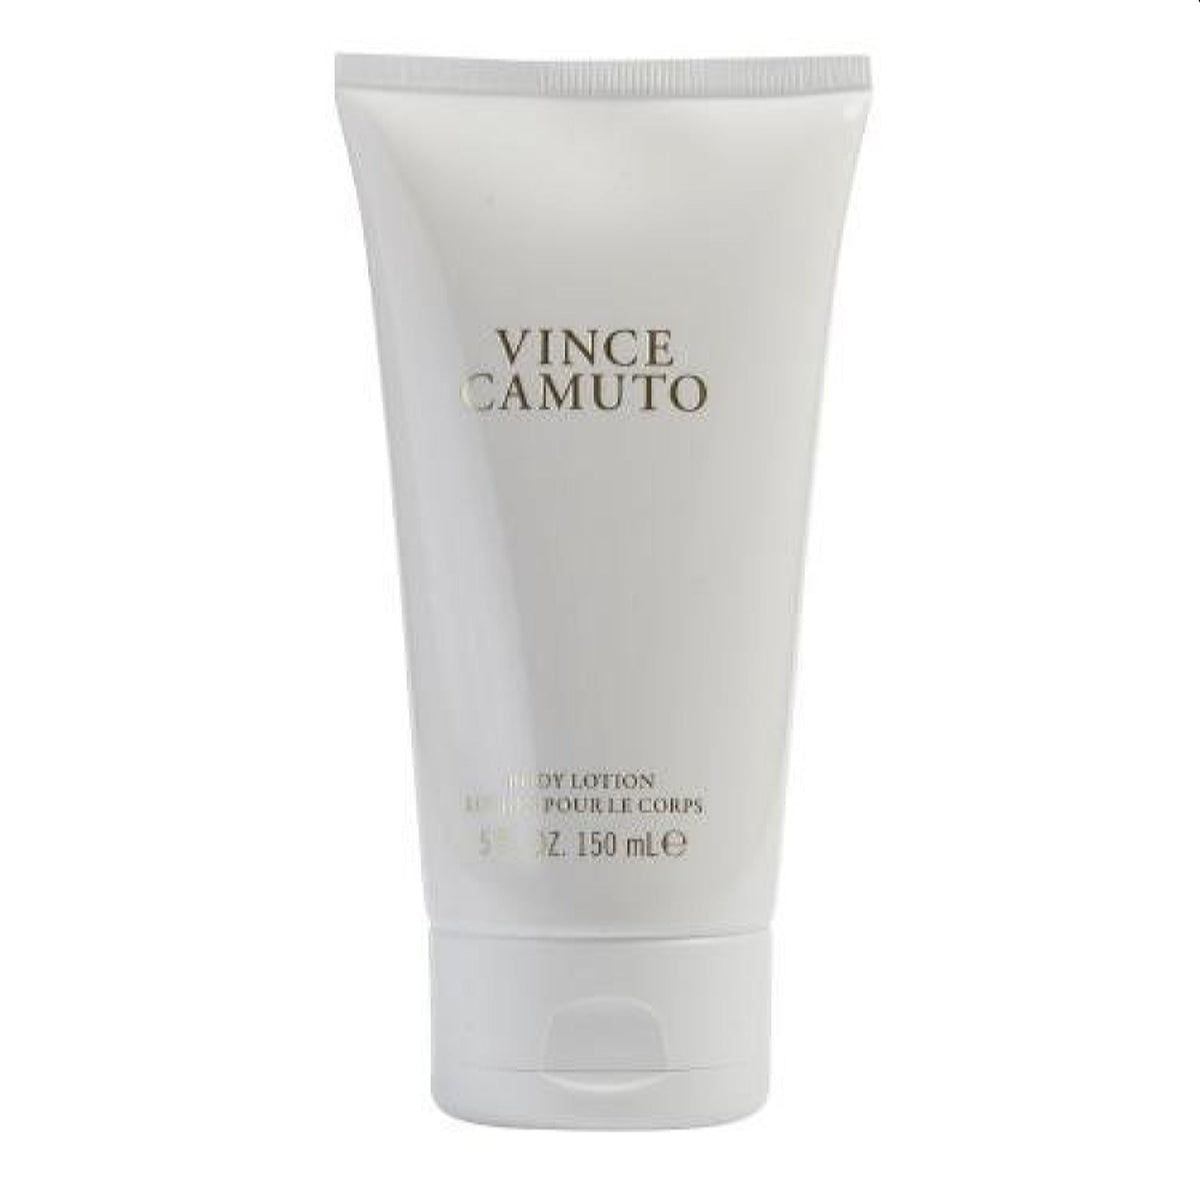 Vince Camuto Vince Camuto Body Lotion 5.0 Oz (150 Ml) For Women   